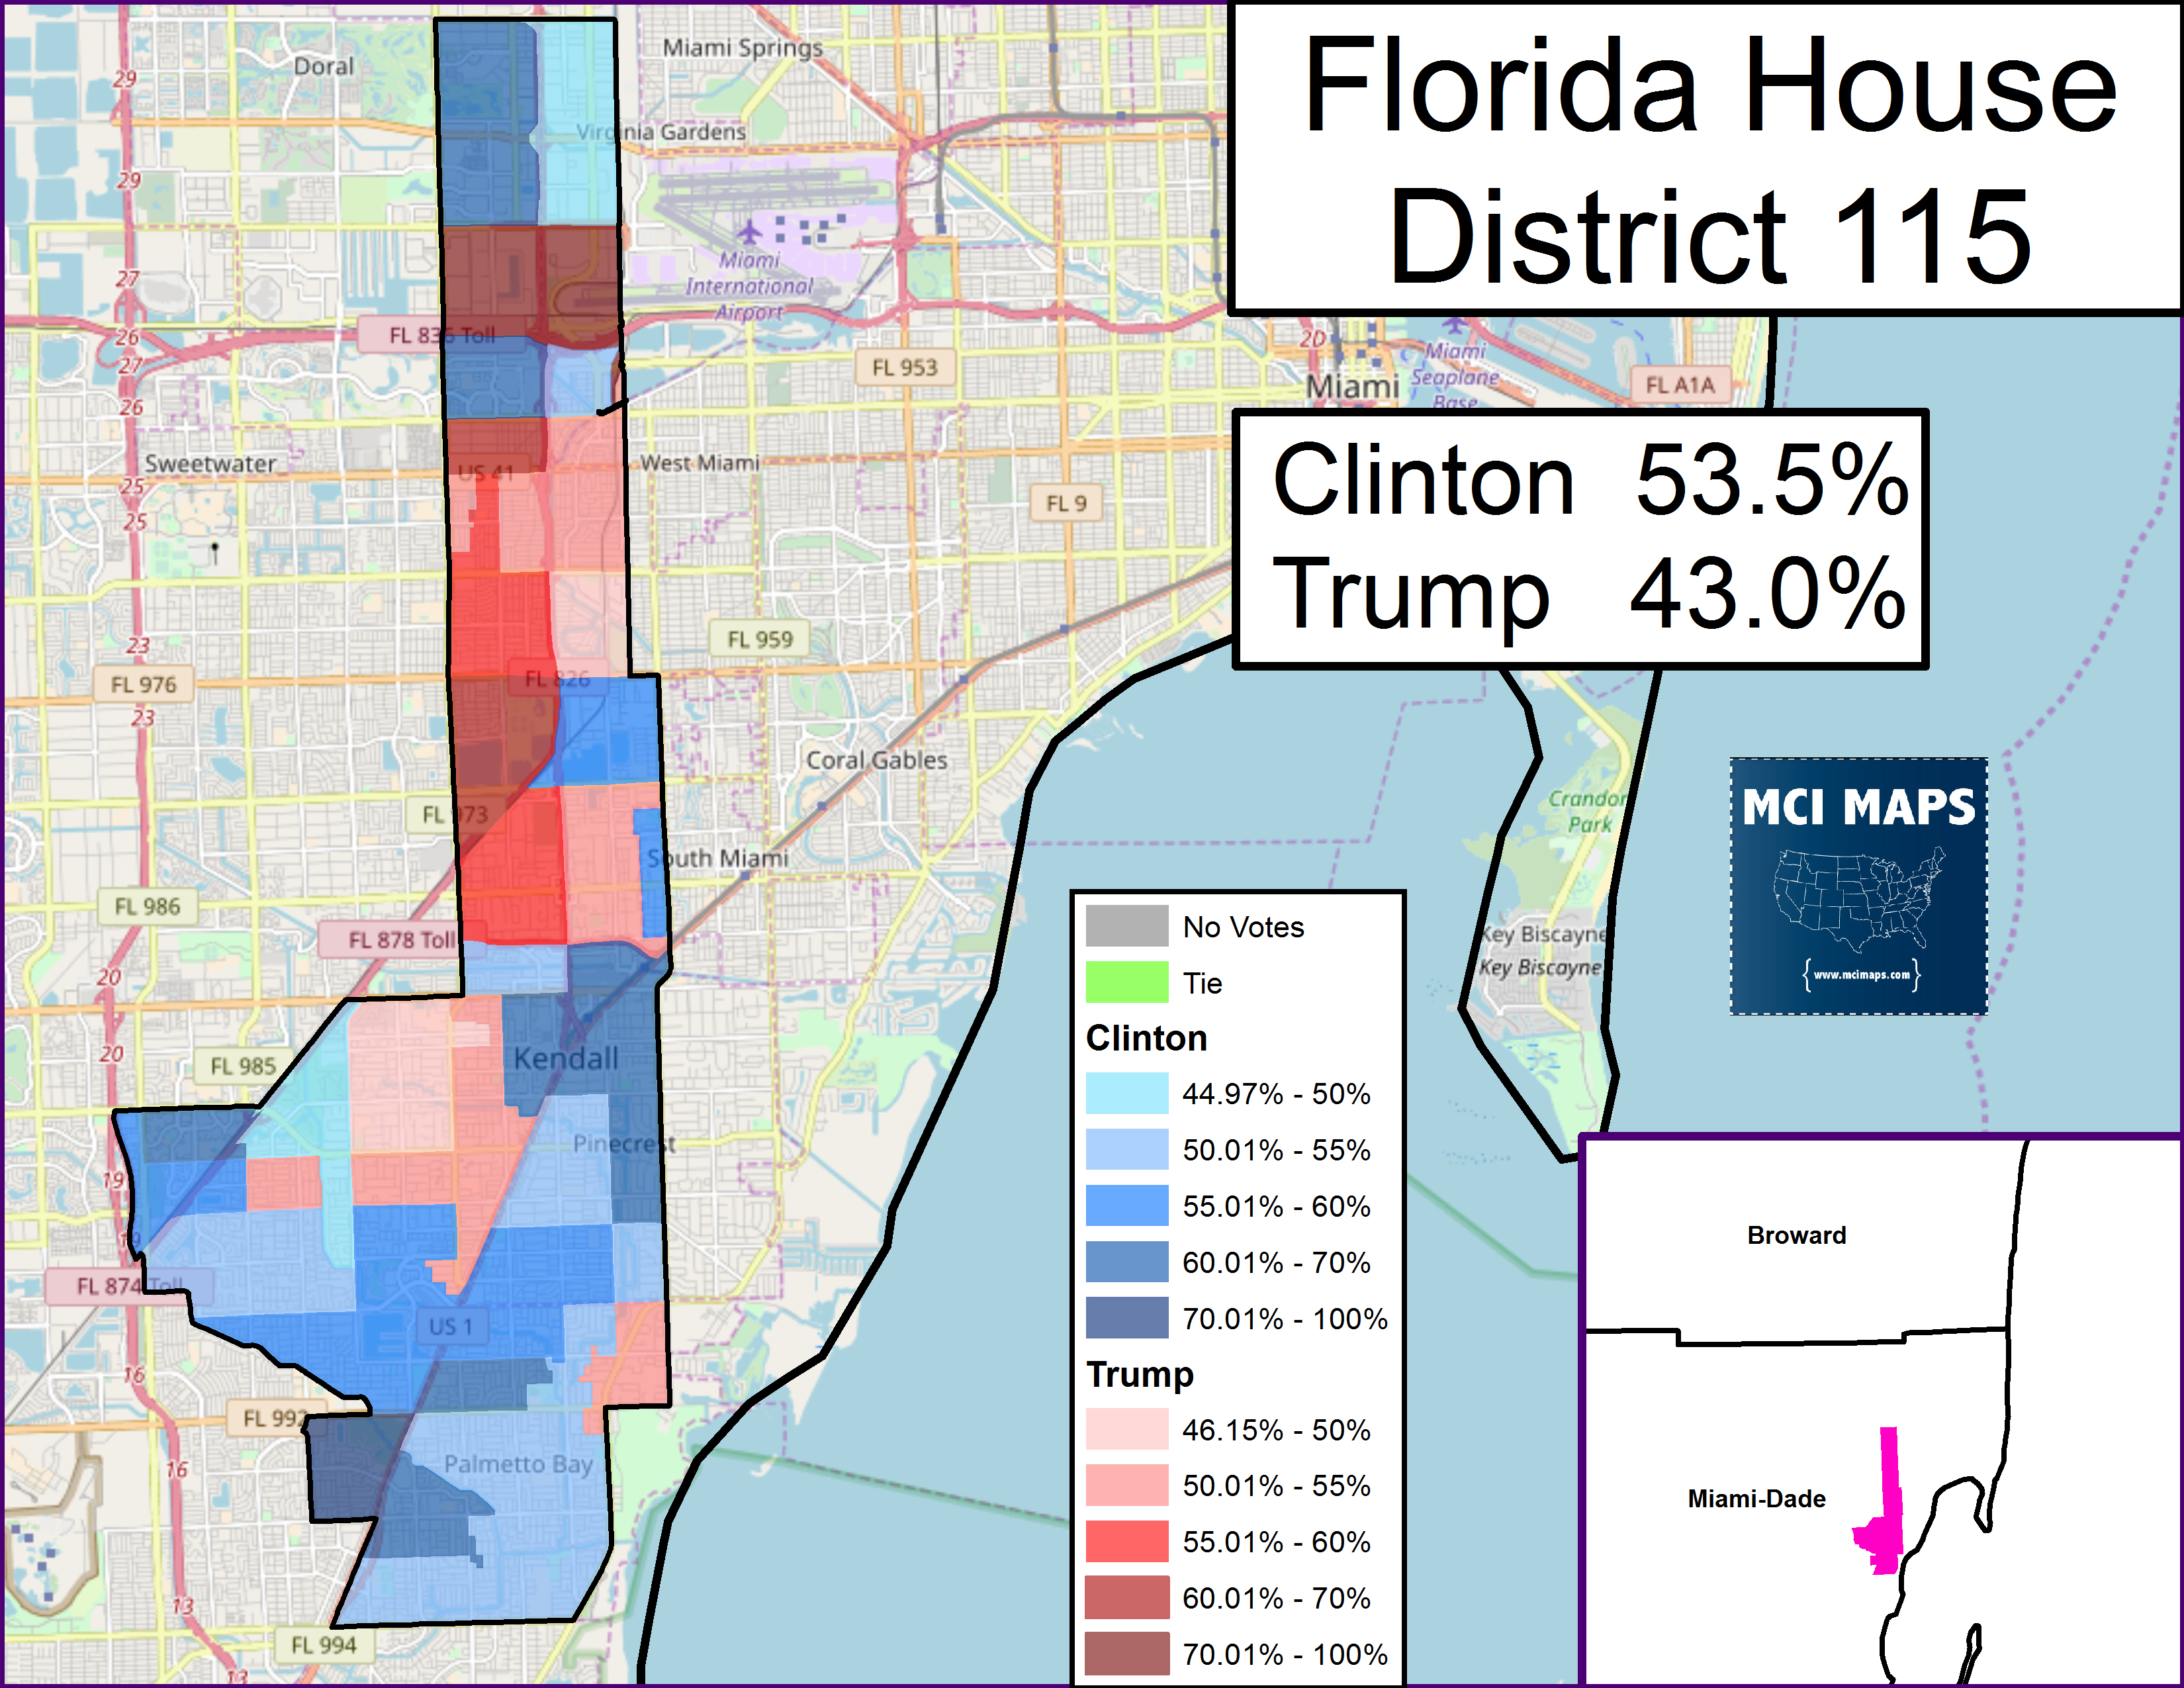 Florida&amp;#039;s 2018 State House Ratings – Mci Maps - Florida House District 115 Map